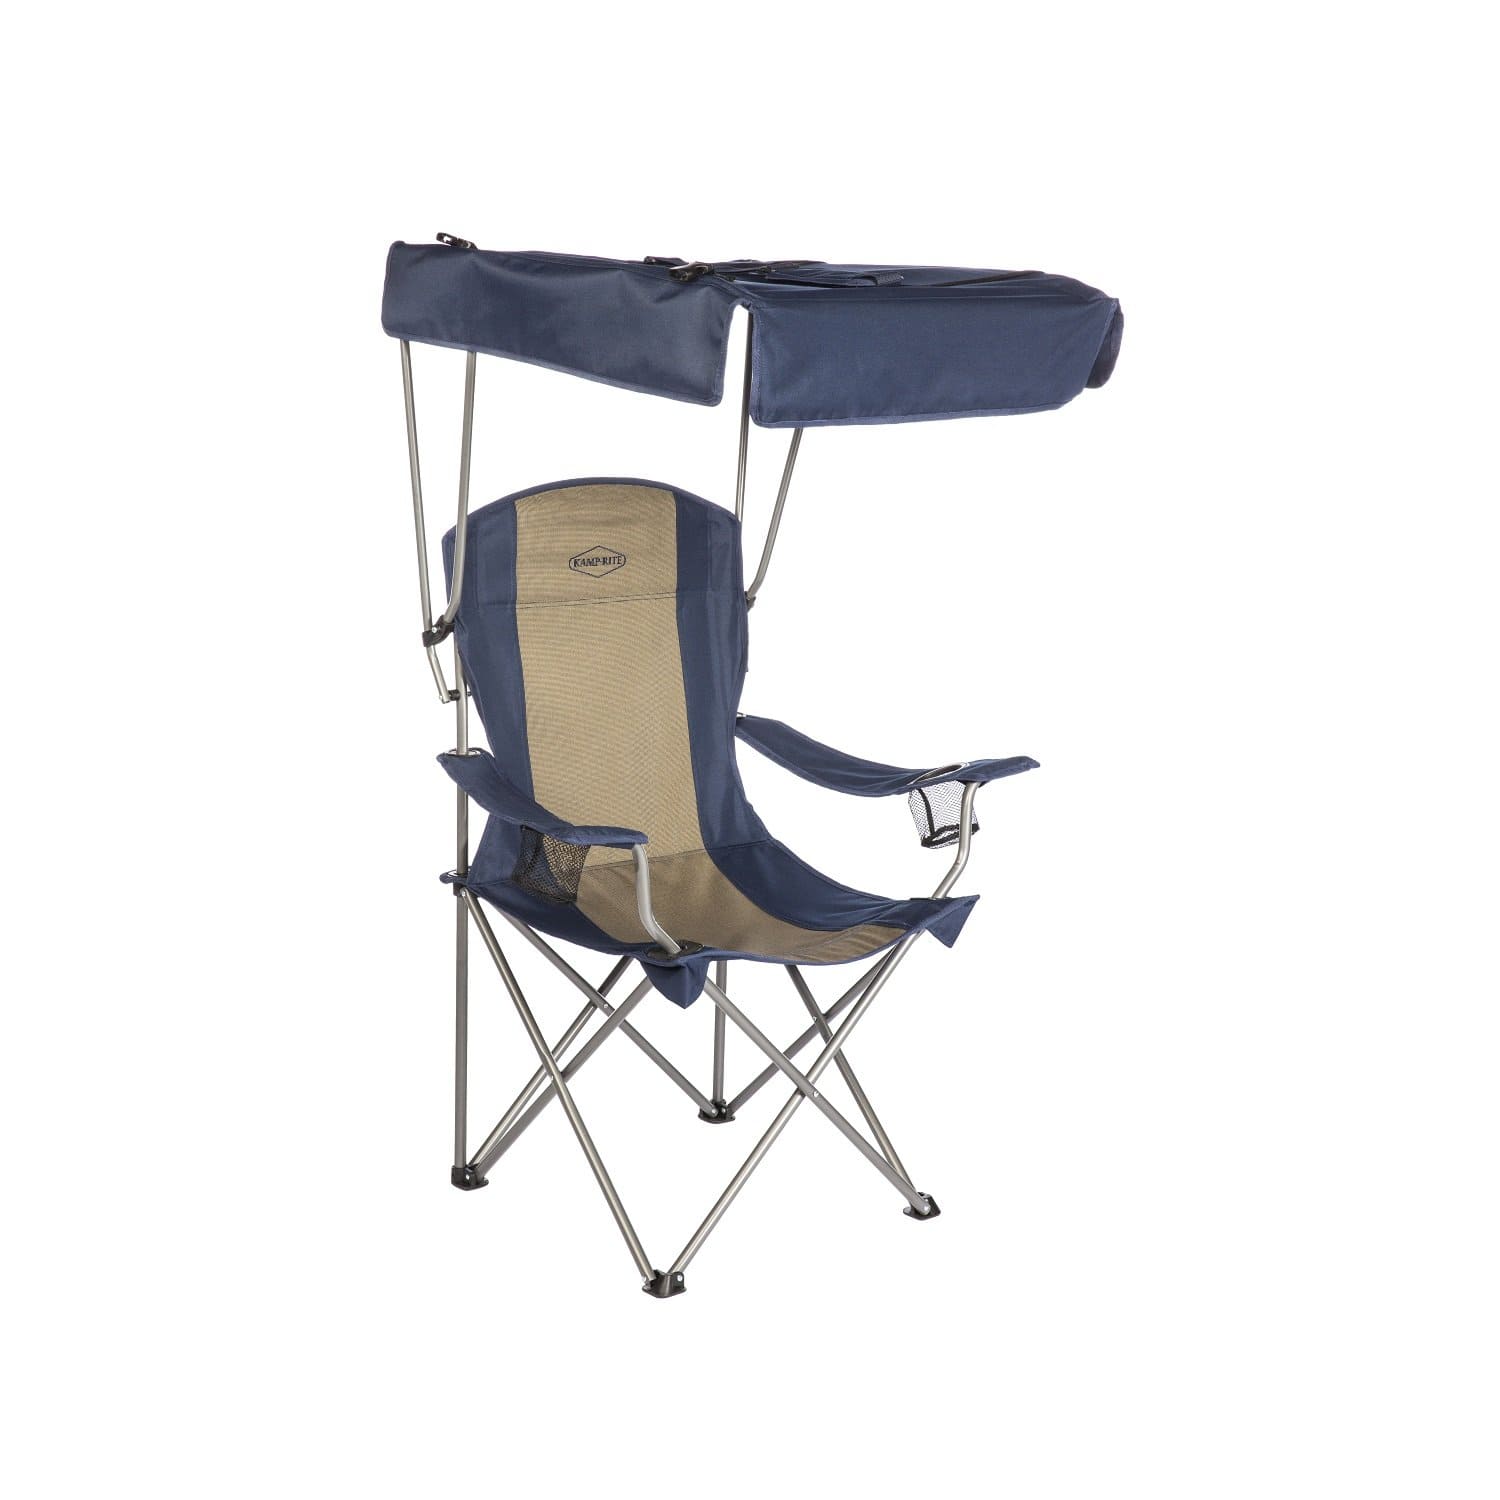 Kamp-Rite Camping & Outdoor : Tents Kamp-Rite Chair with Shade Canopy